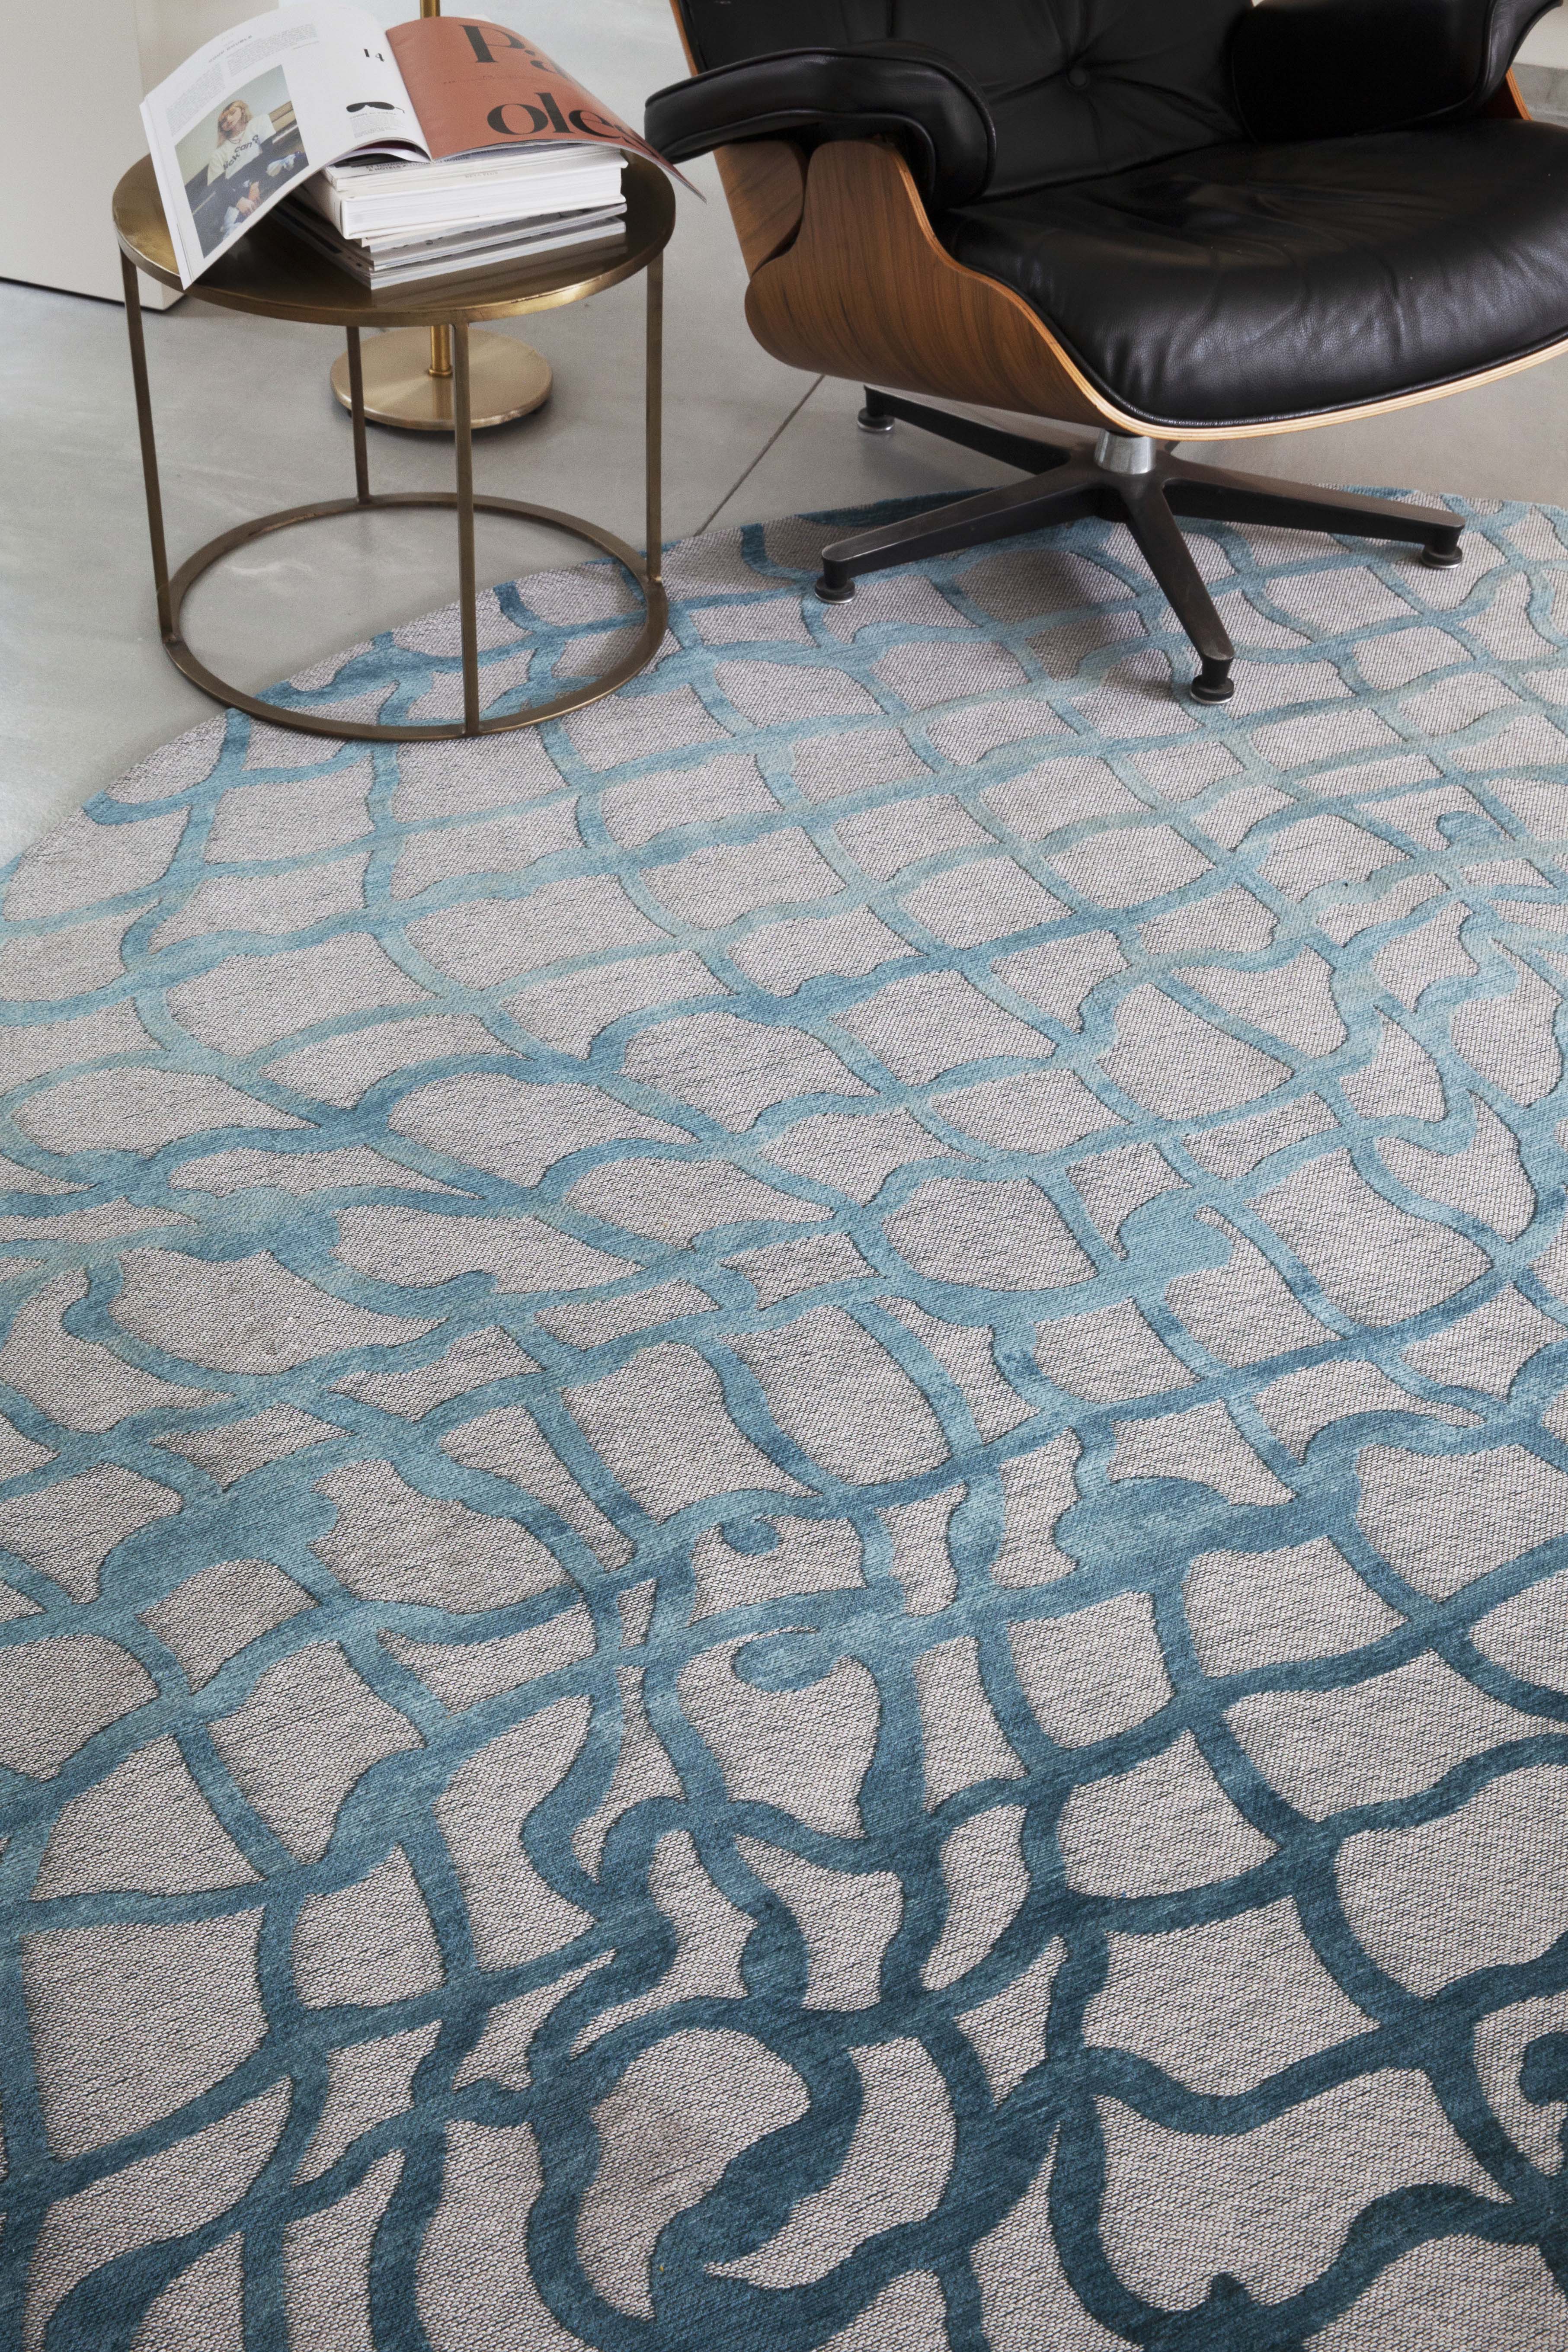 flatweave circle rug with abstract blue design